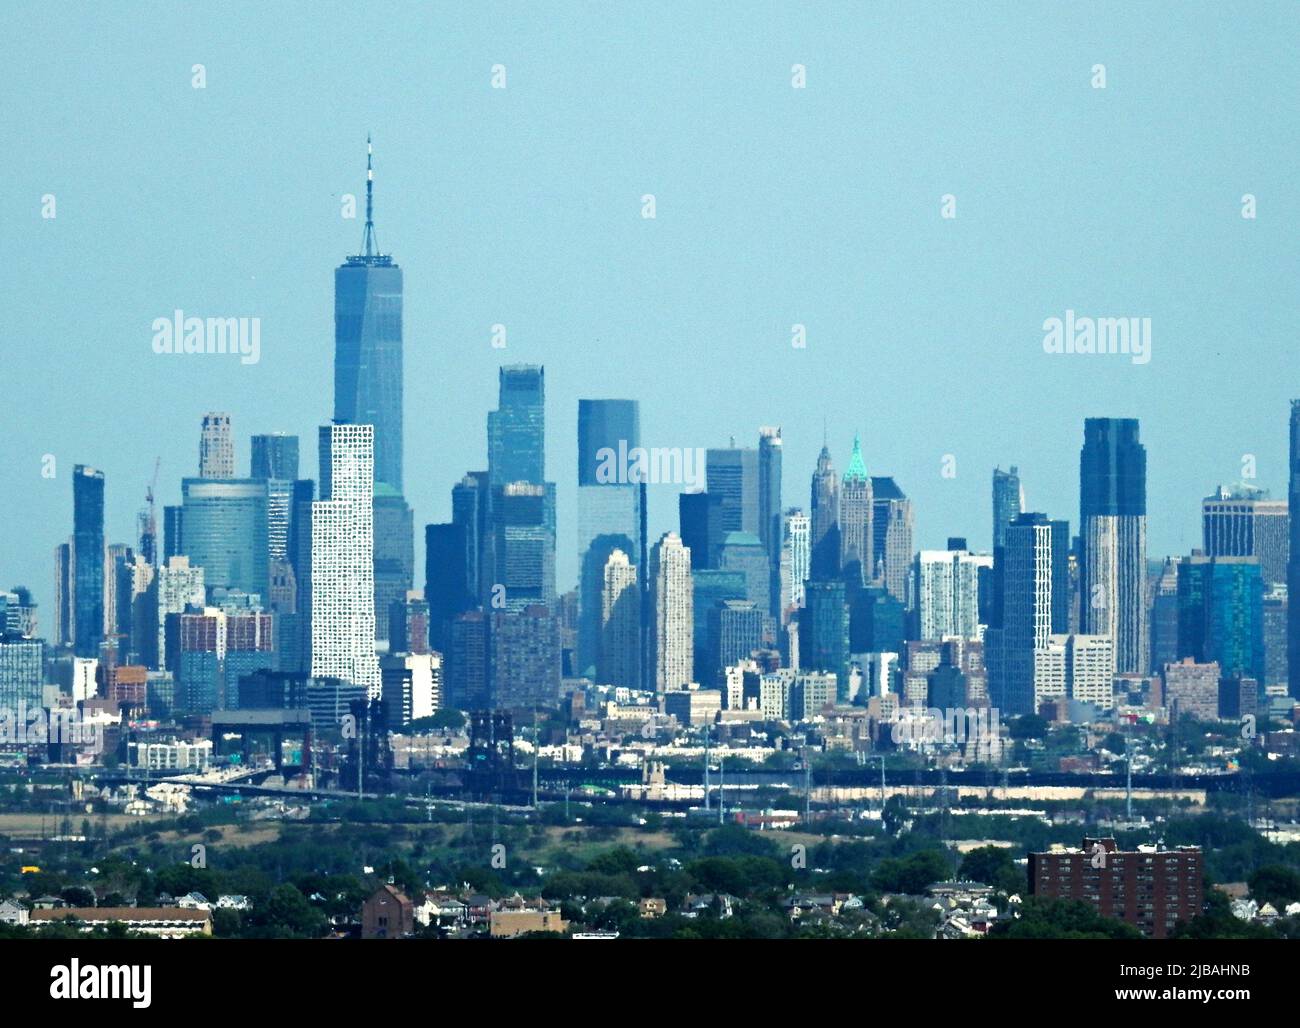 View of New York City's Manhattan skyline from Eagle Rock Reservation in Montclair, NJ, with some atmospheric distortion caused by the distance -02 Stock Photo